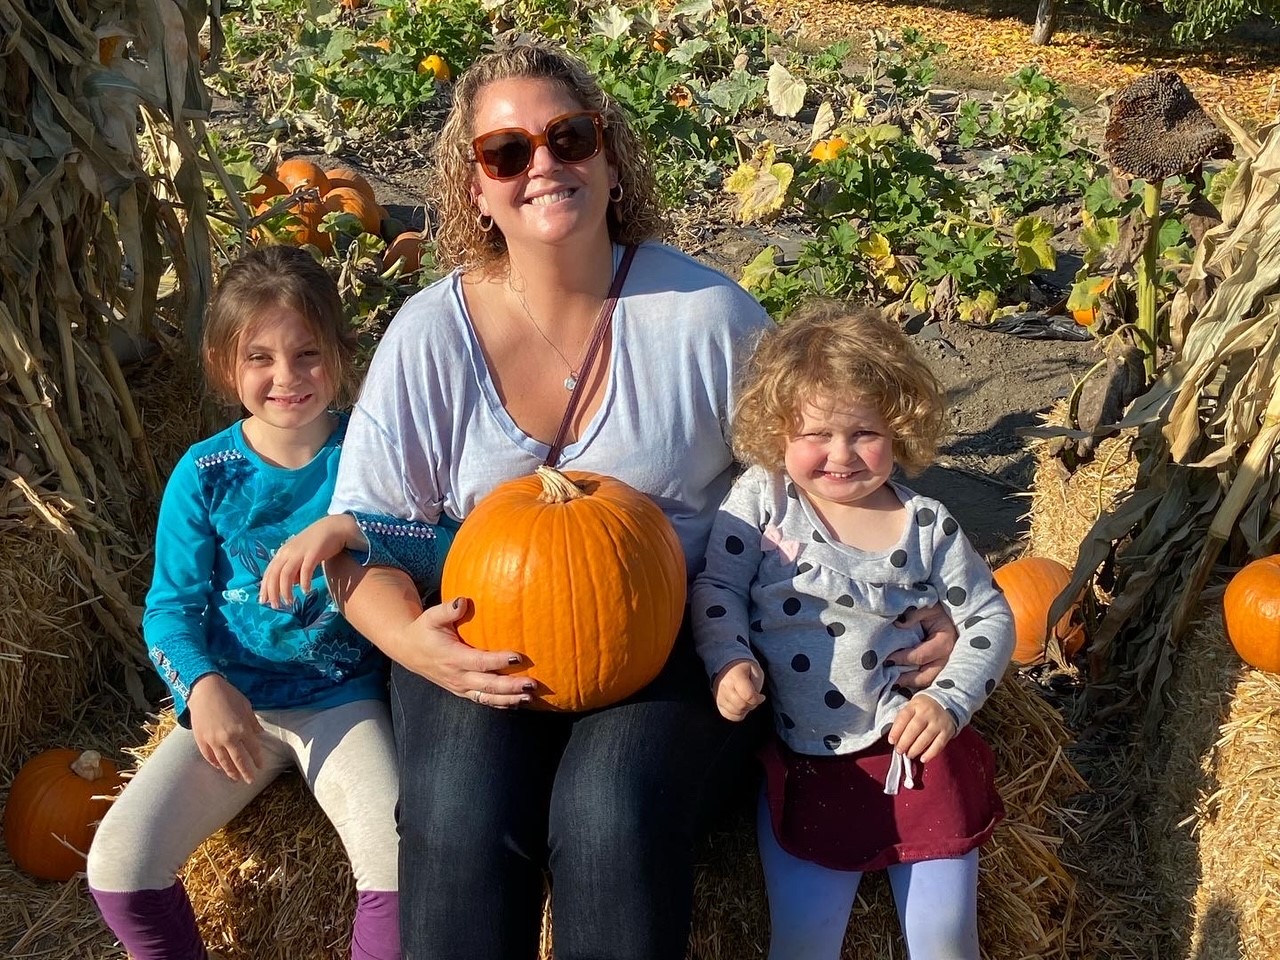 A woman with wavy blonde hair, wearing sunglasses, with a light blue t-shirt and jeans, holding a pumpkin, sitting on a hay bale between two children, the one on the left with a bright blue sweatshirt and grey and purple leggings, and on the right with a grey and black polka dot sweatshirt, red skirt and blue leggings, with a pumpkin patch in the background.